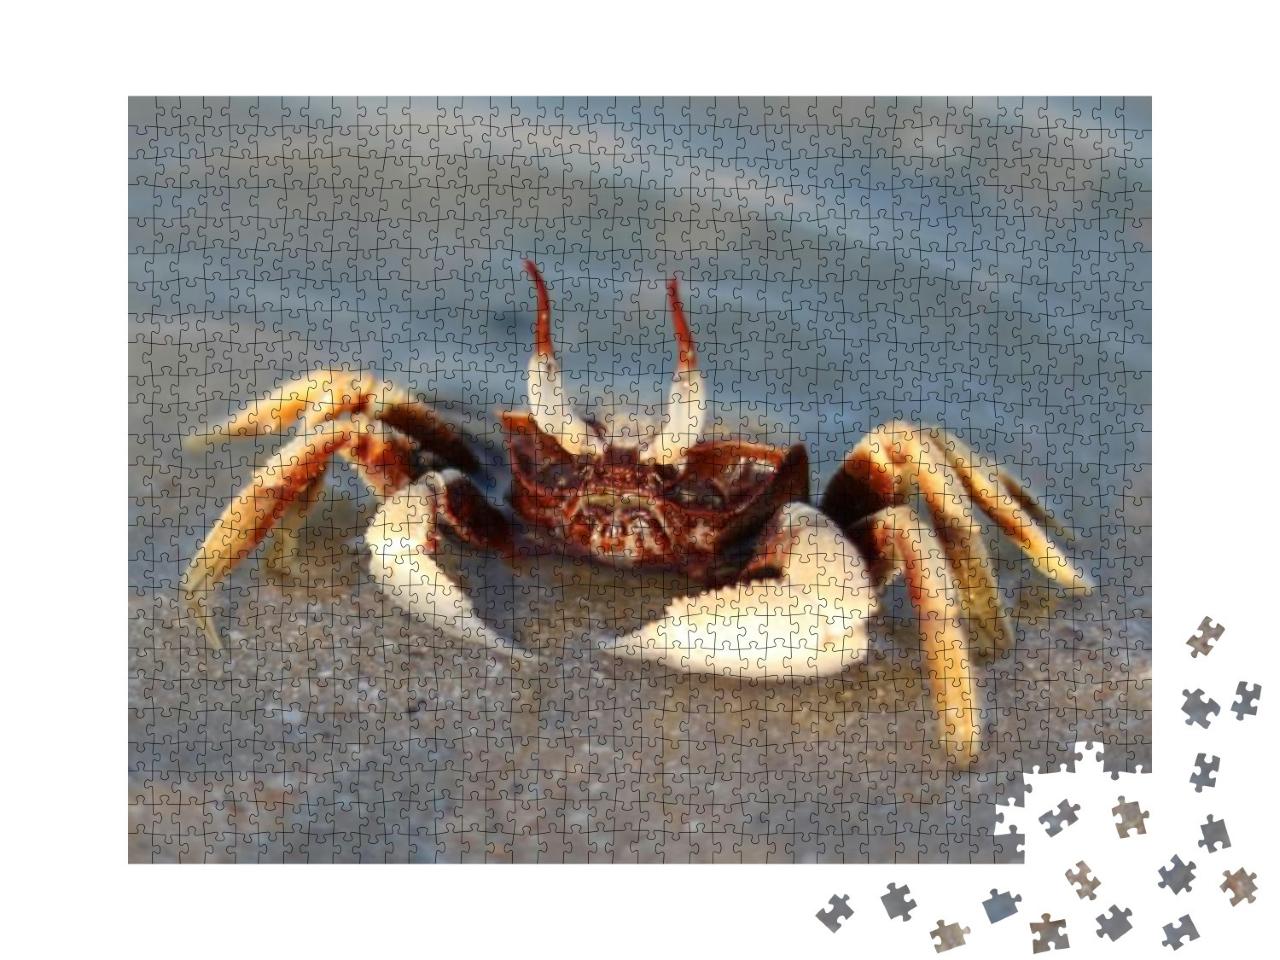 Ghost Eye Crab in the Sea Closed Up... Jigsaw Puzzle with 1000 pieces